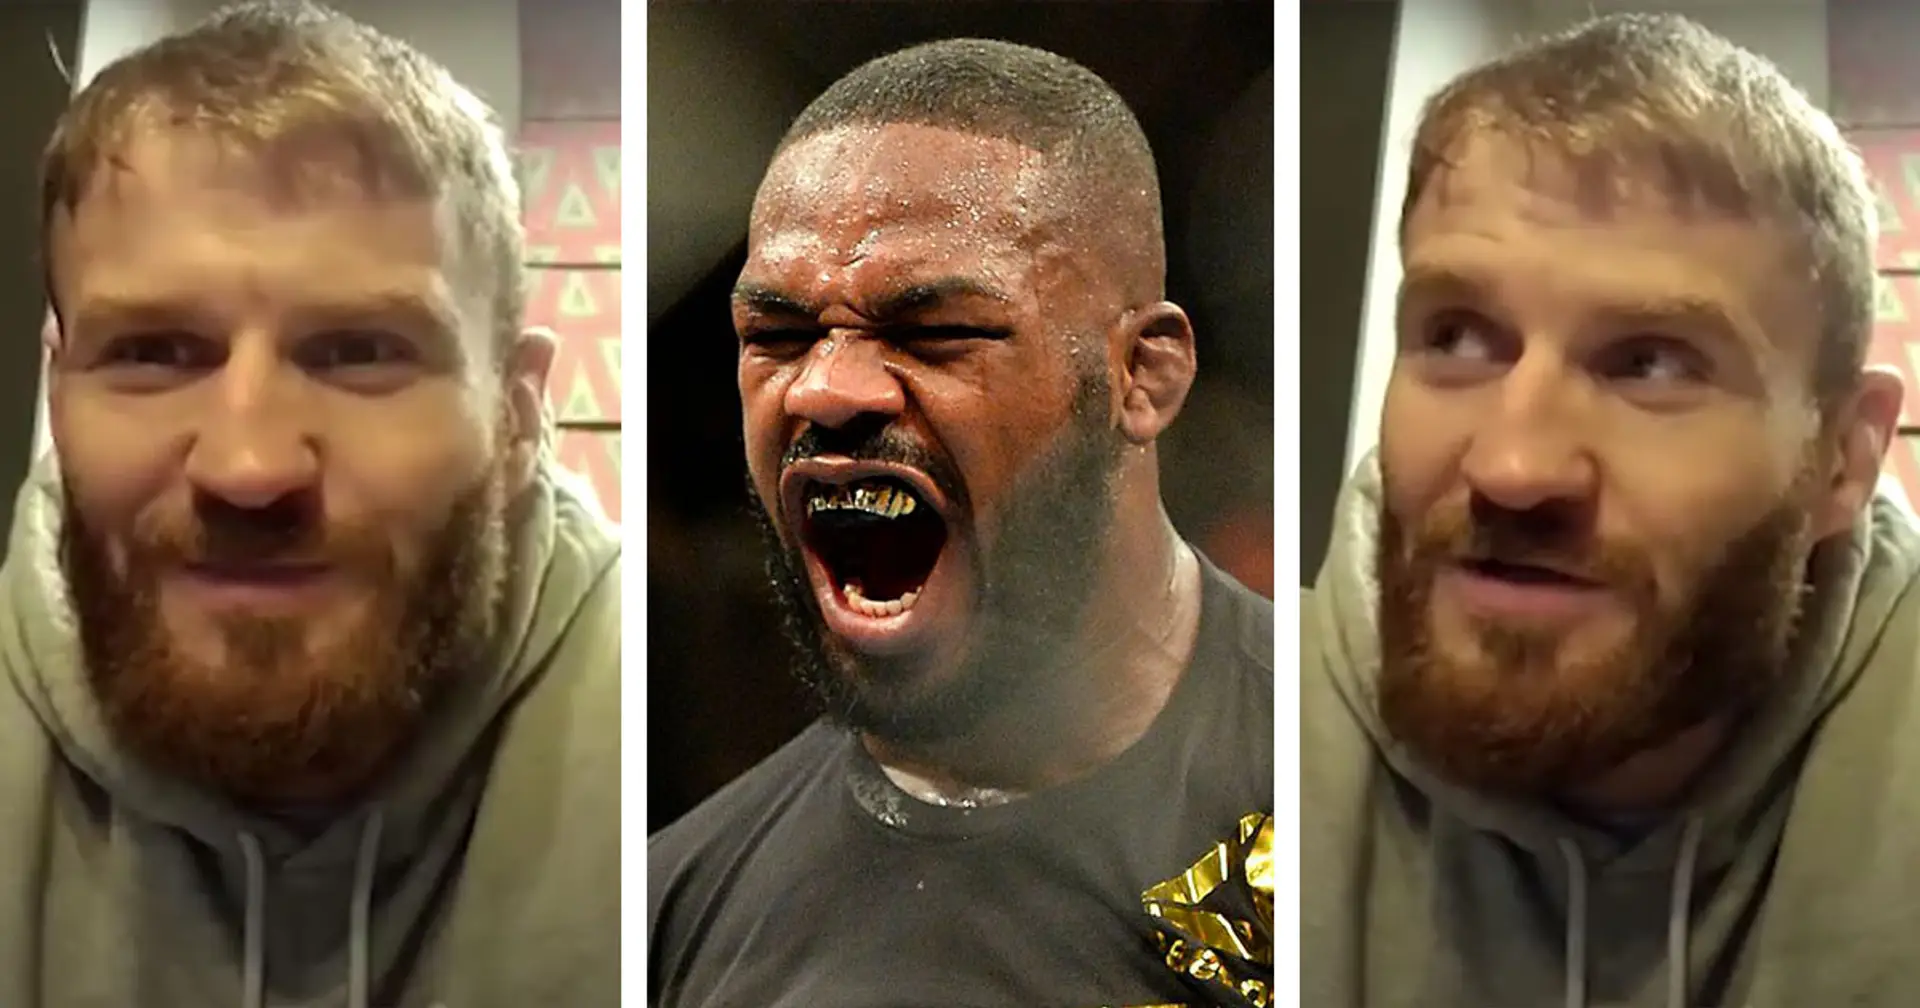 Jon Jones: 'Blachowicz, build your own legacy without talking s**t about me'